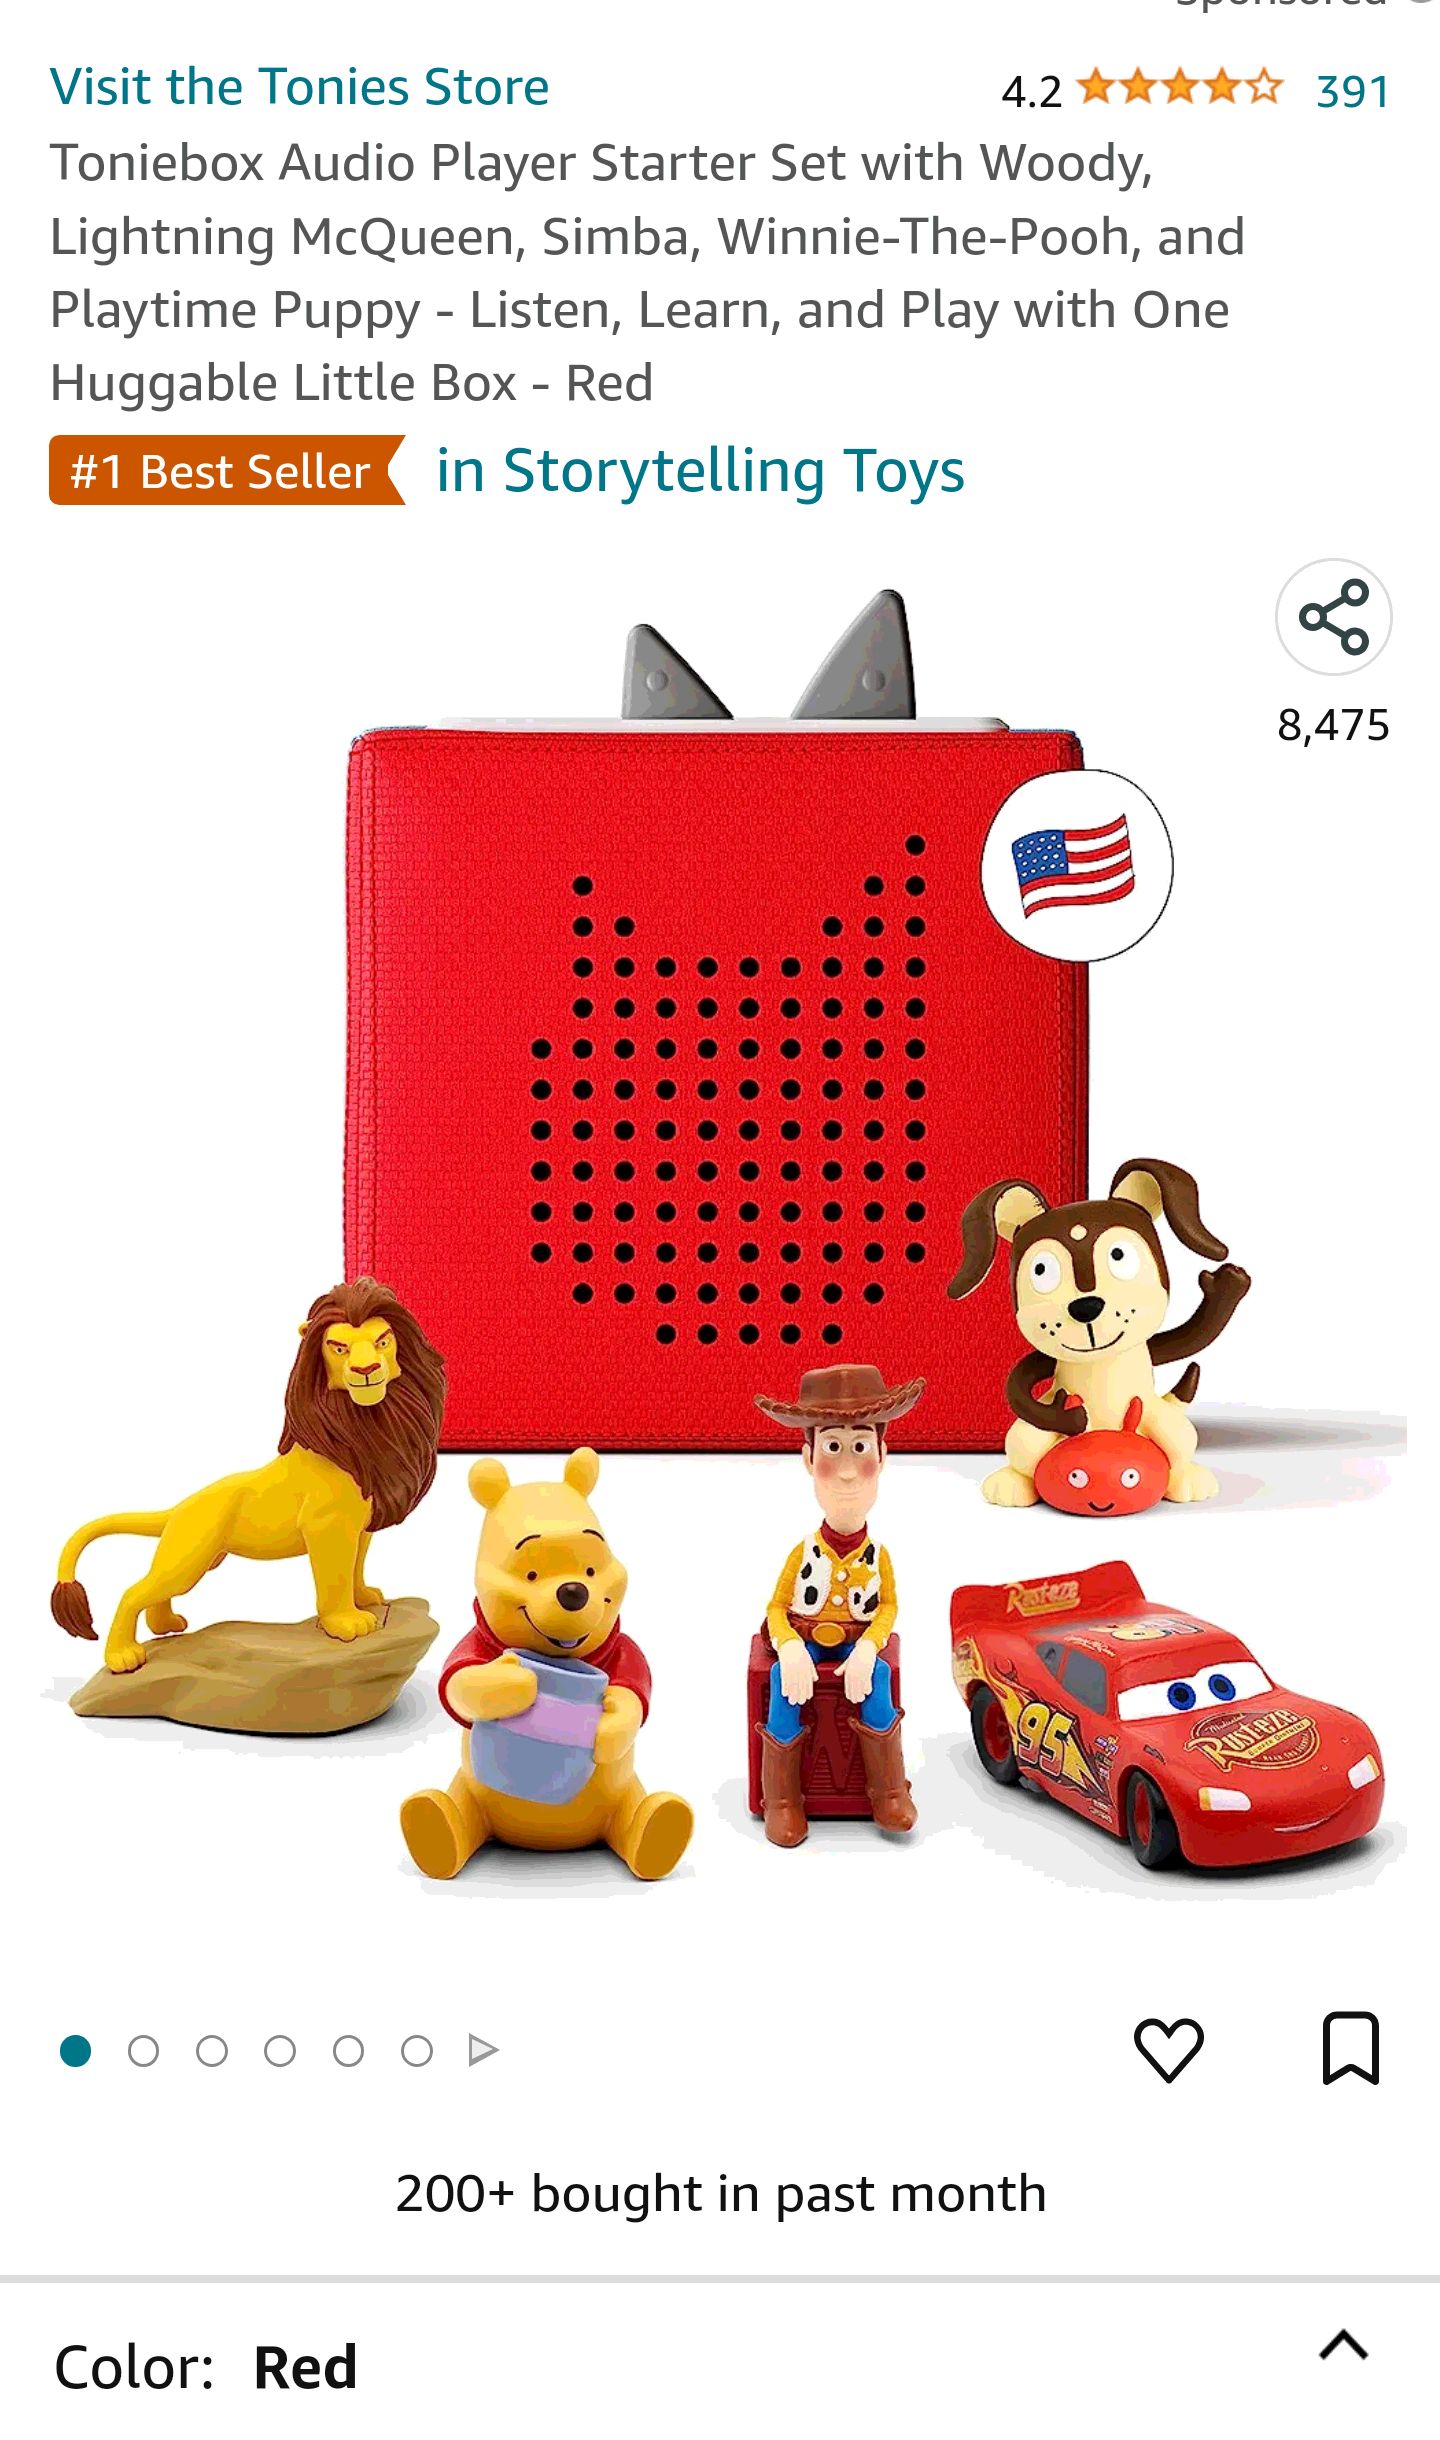 Toniebox Audio Player Starter Set with Woody, Lightning McQueen, Simba, Winnie-The-Pooh, and Playtime Puppy - Listen, Learn, and Play with One Huggable Little Box - Red : Toys & Games